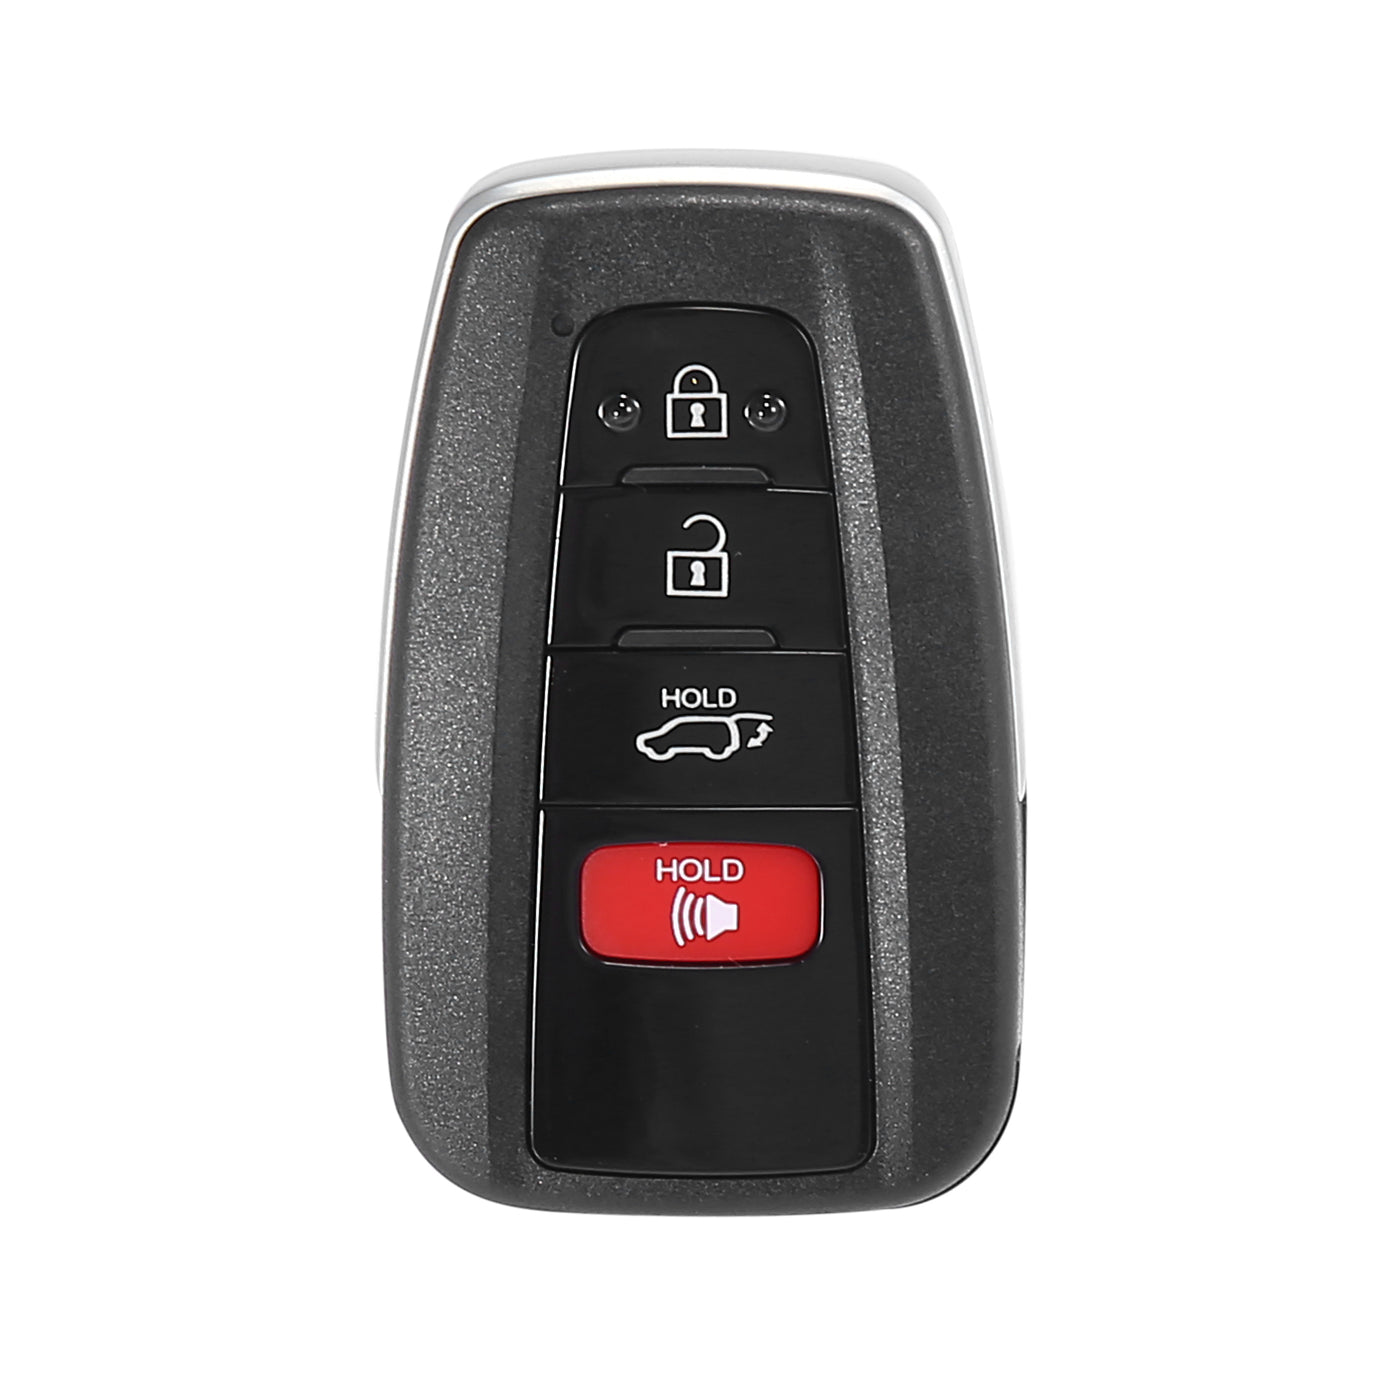 X AUTOHAUX 314.3MHz 8990H-0R030 Replacement Keyless Entry Remote Car Key Fob for Toyota RAV4 2019 2020 2021 FCC ID: HYQ14FBC-0351 3 Button with Door Key